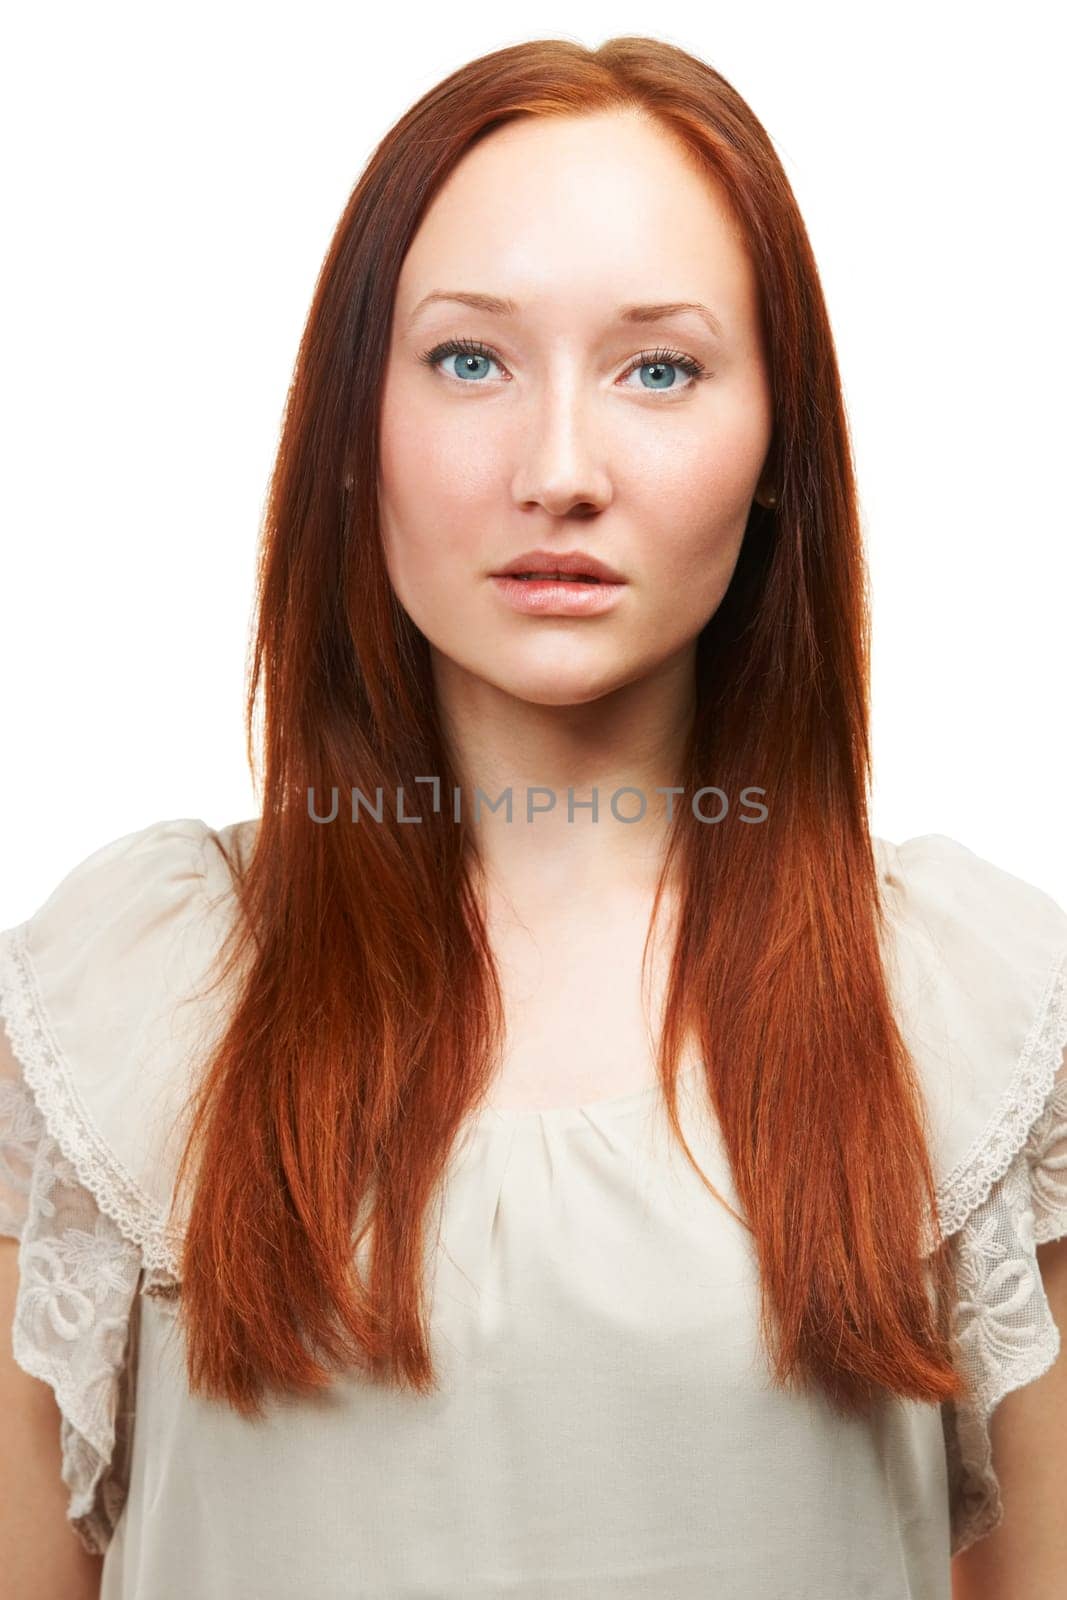 Hair care, ginger or portrait of model with beauty in white background for a natural shine. Face, redhead woman and person in studio with healthy glow, texture or hairstyle results for confidence by YuriArcurs